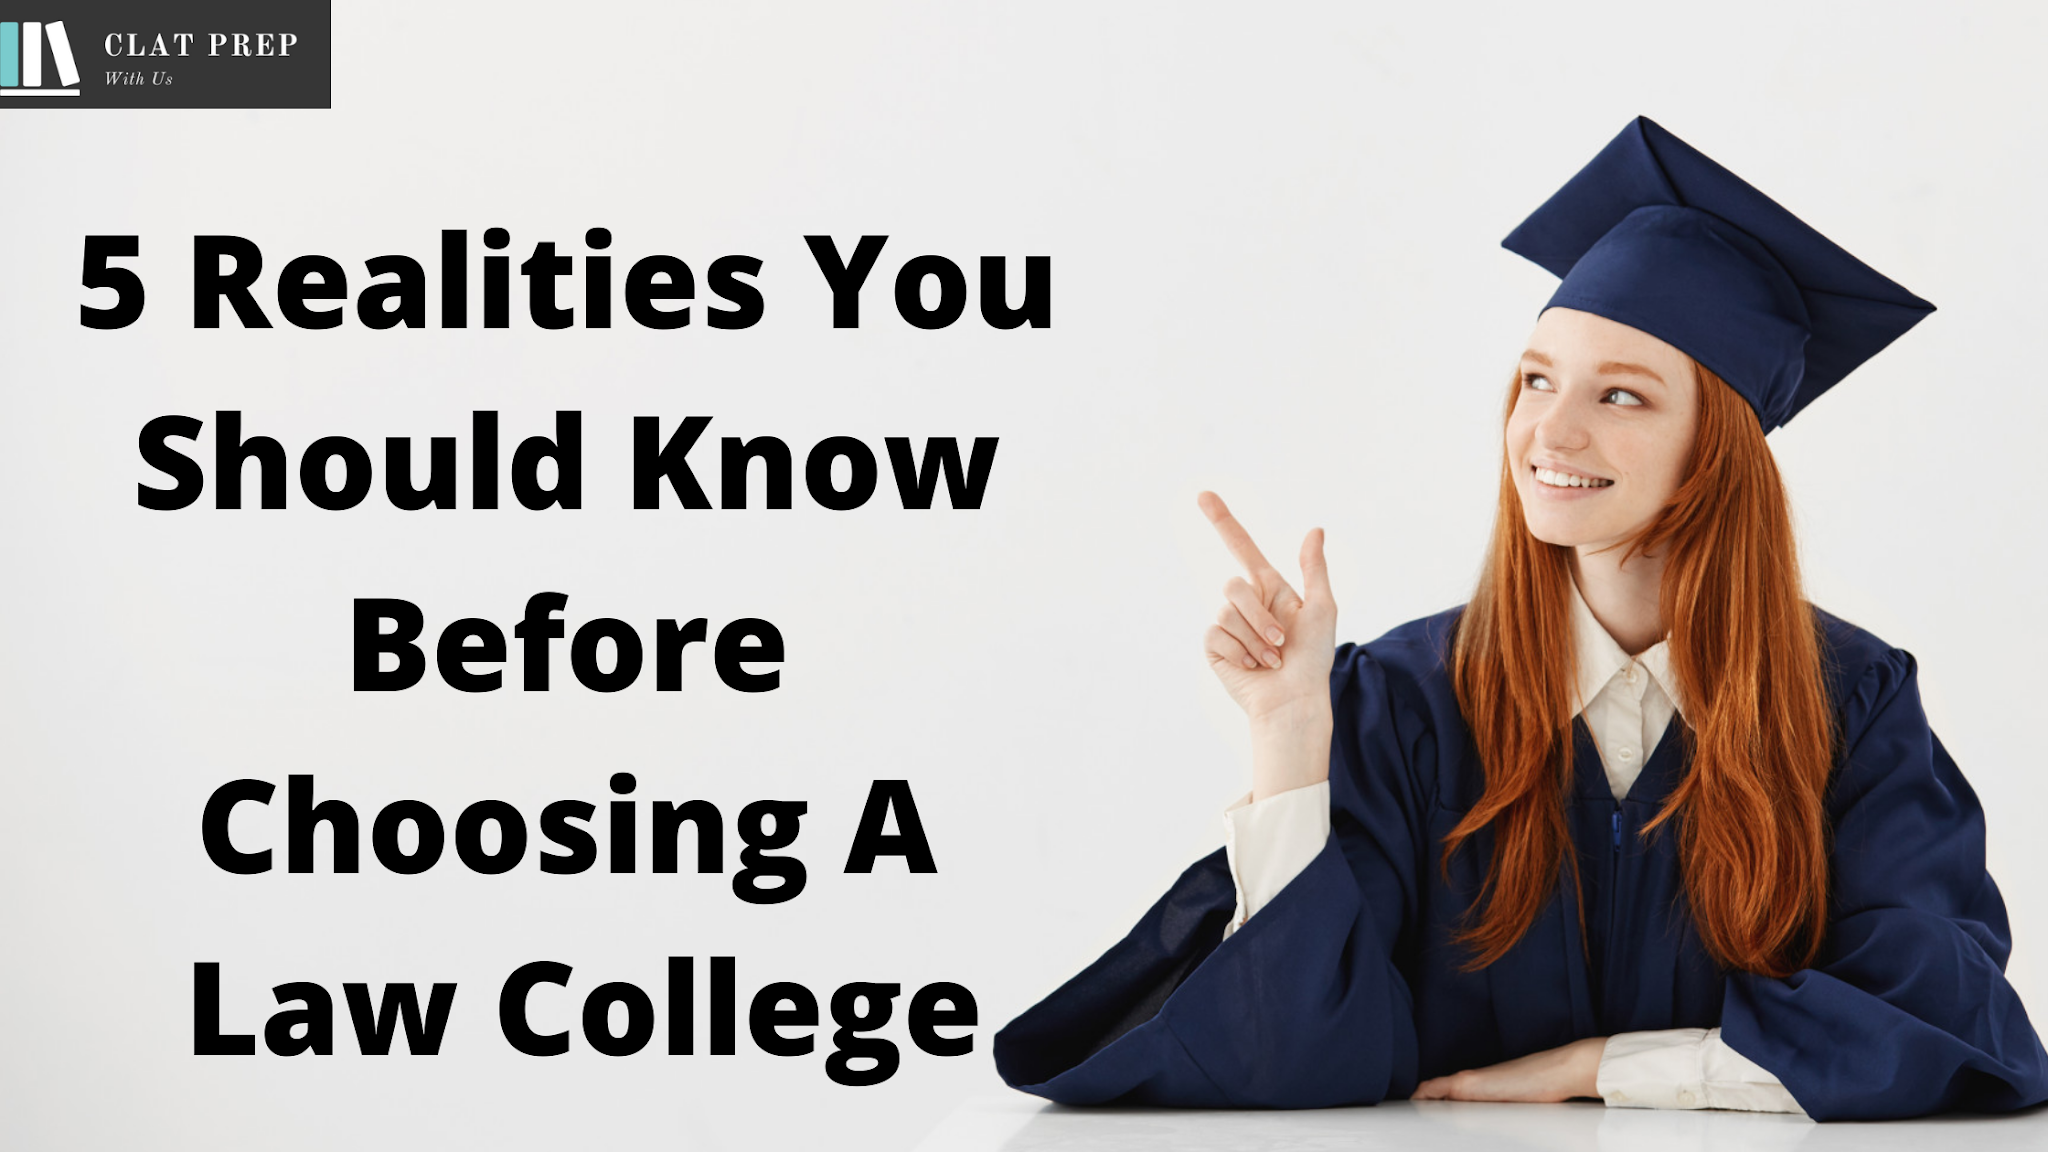 5 Realities You Should Know Before Choosing A Law College